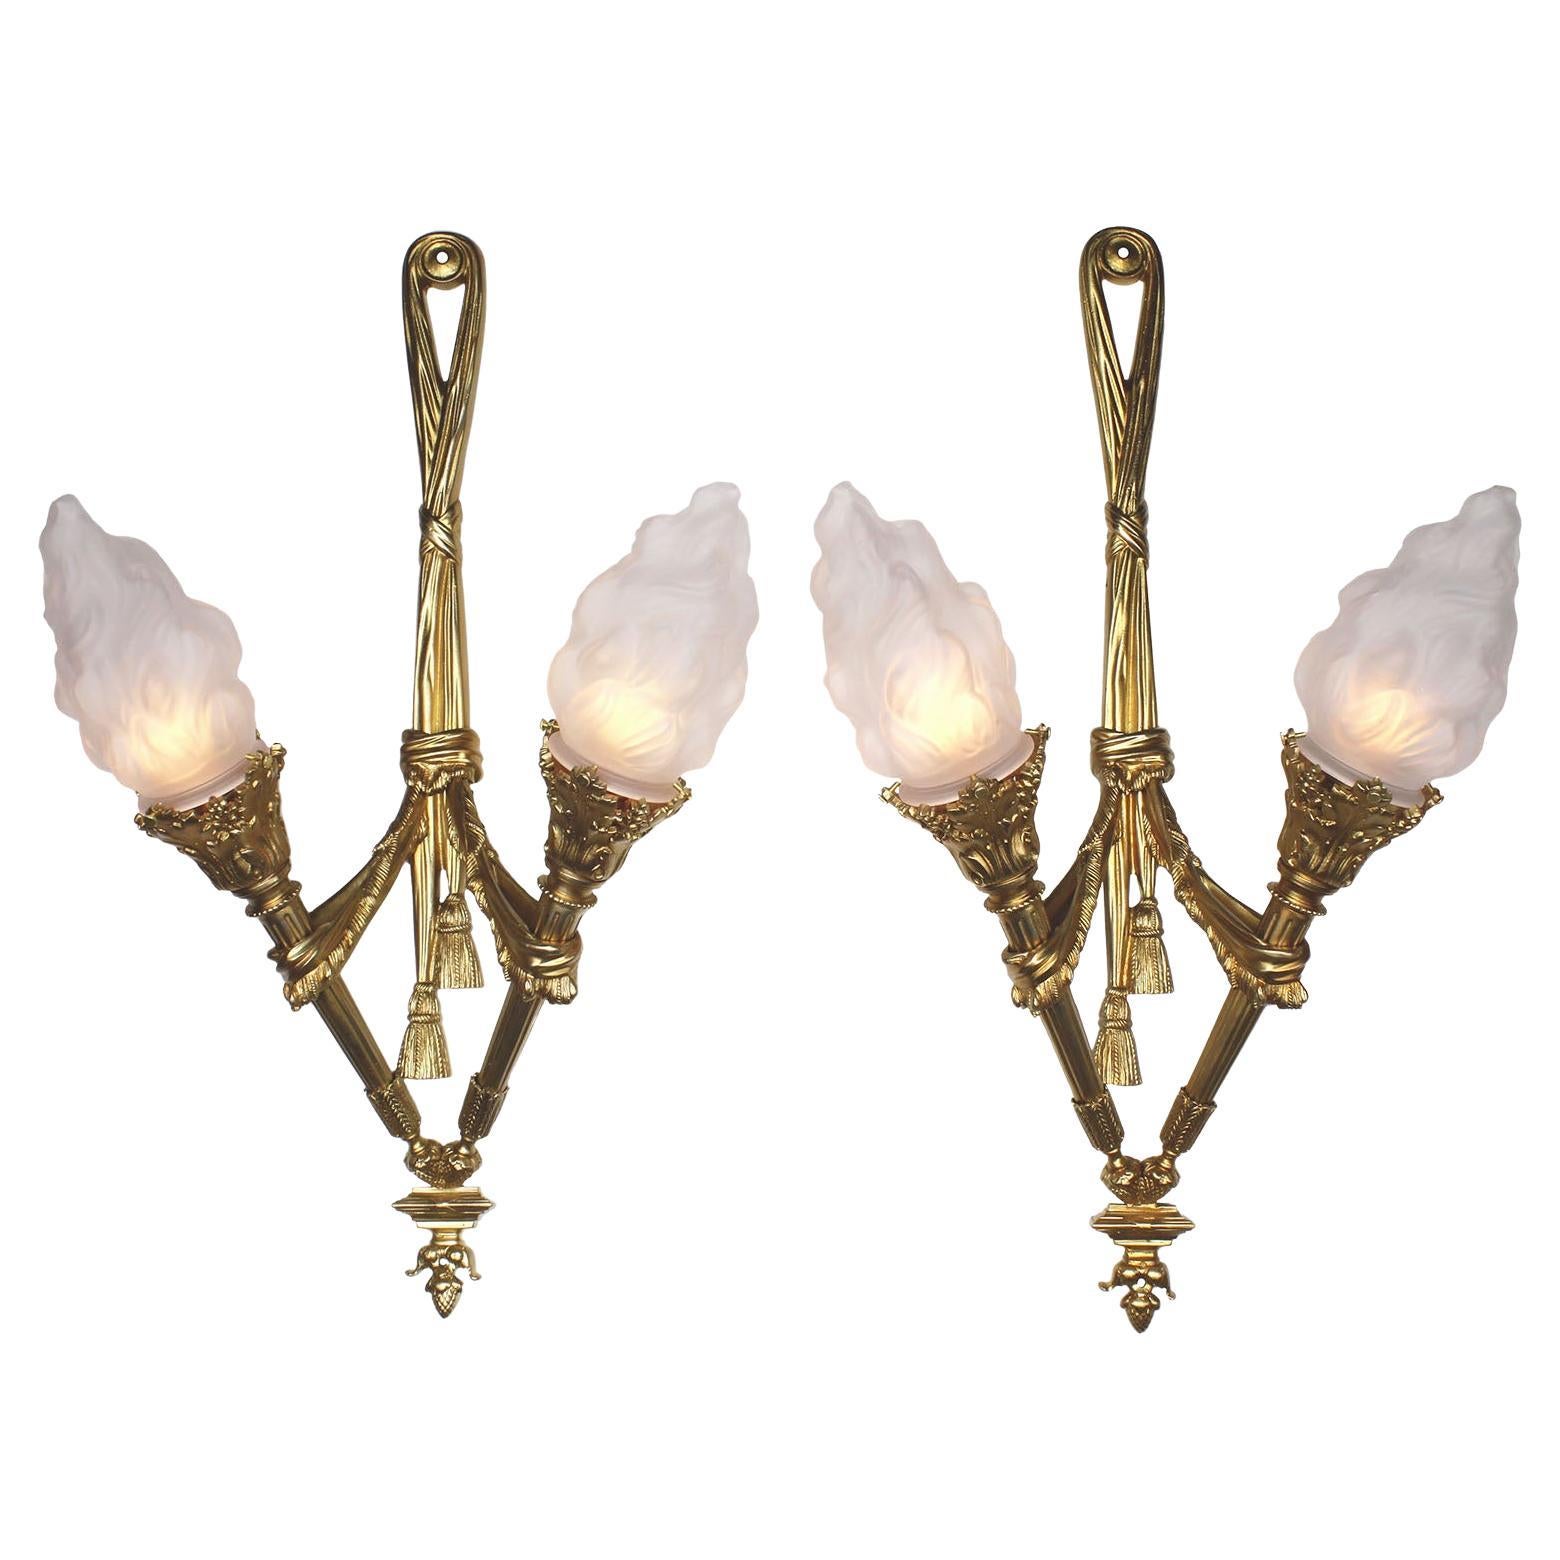 Pair of French Empire Style Gilt-Bronze Two-Light Wall Torchère Sconces